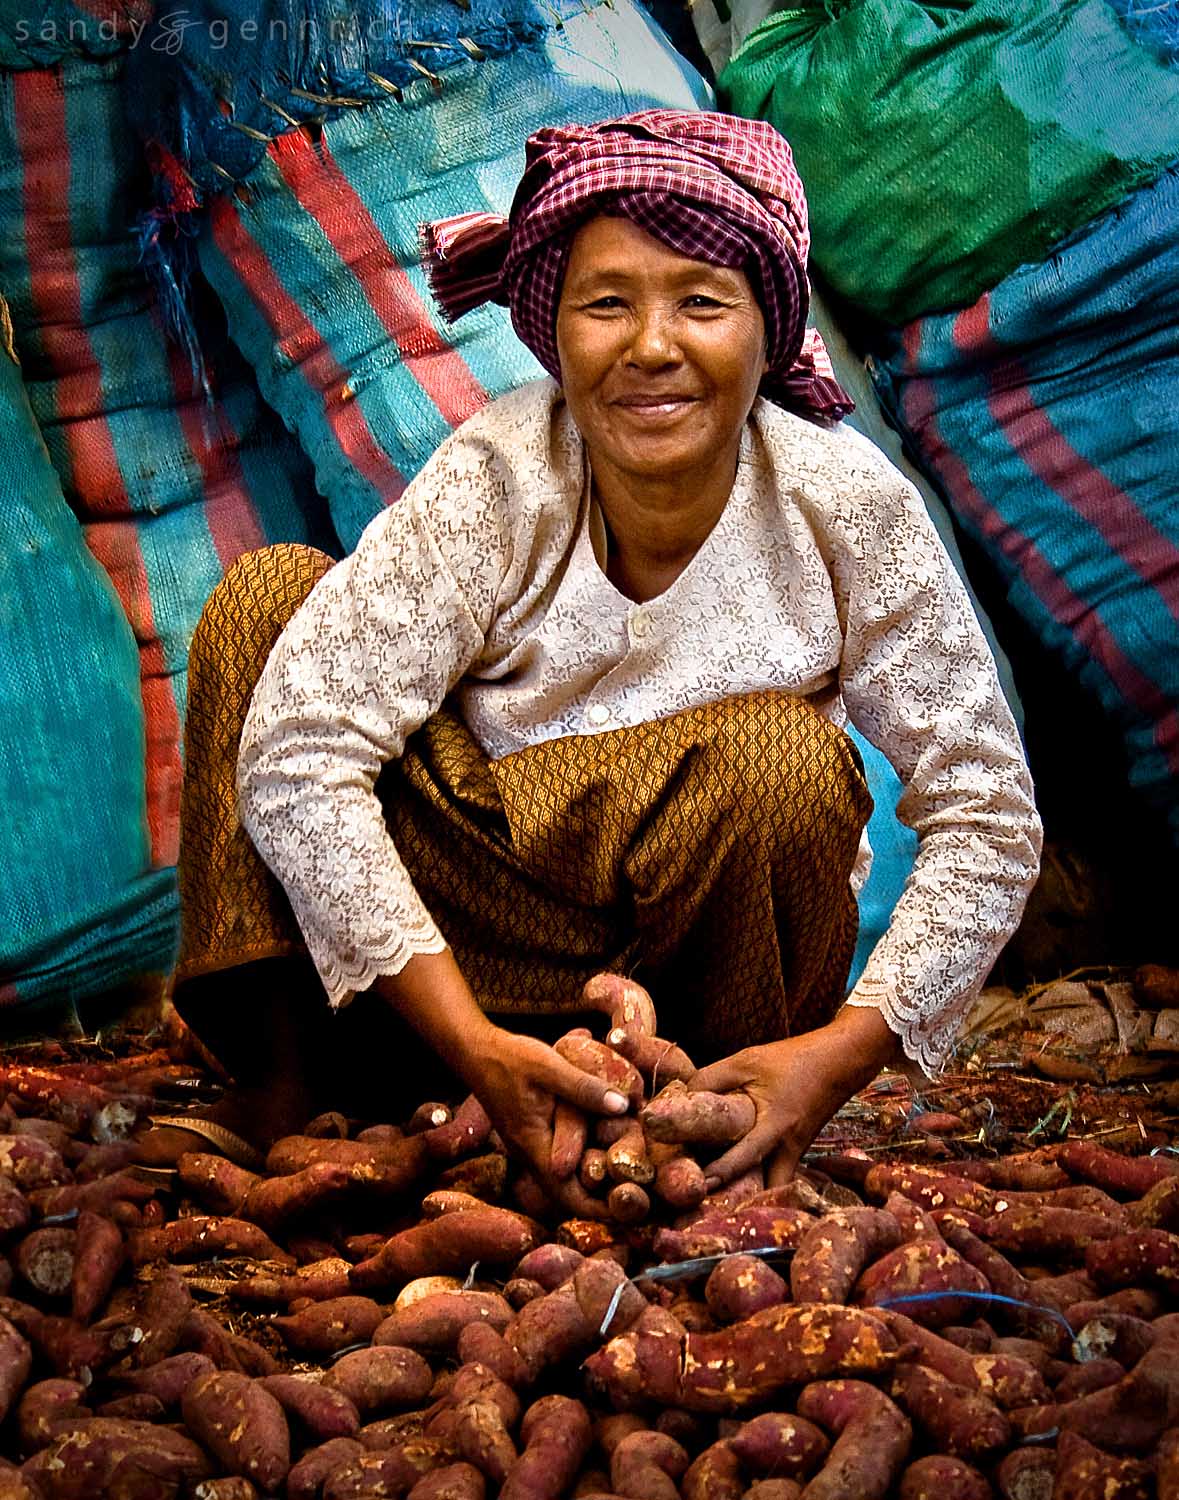 Lady with Potatoes, Cambodia